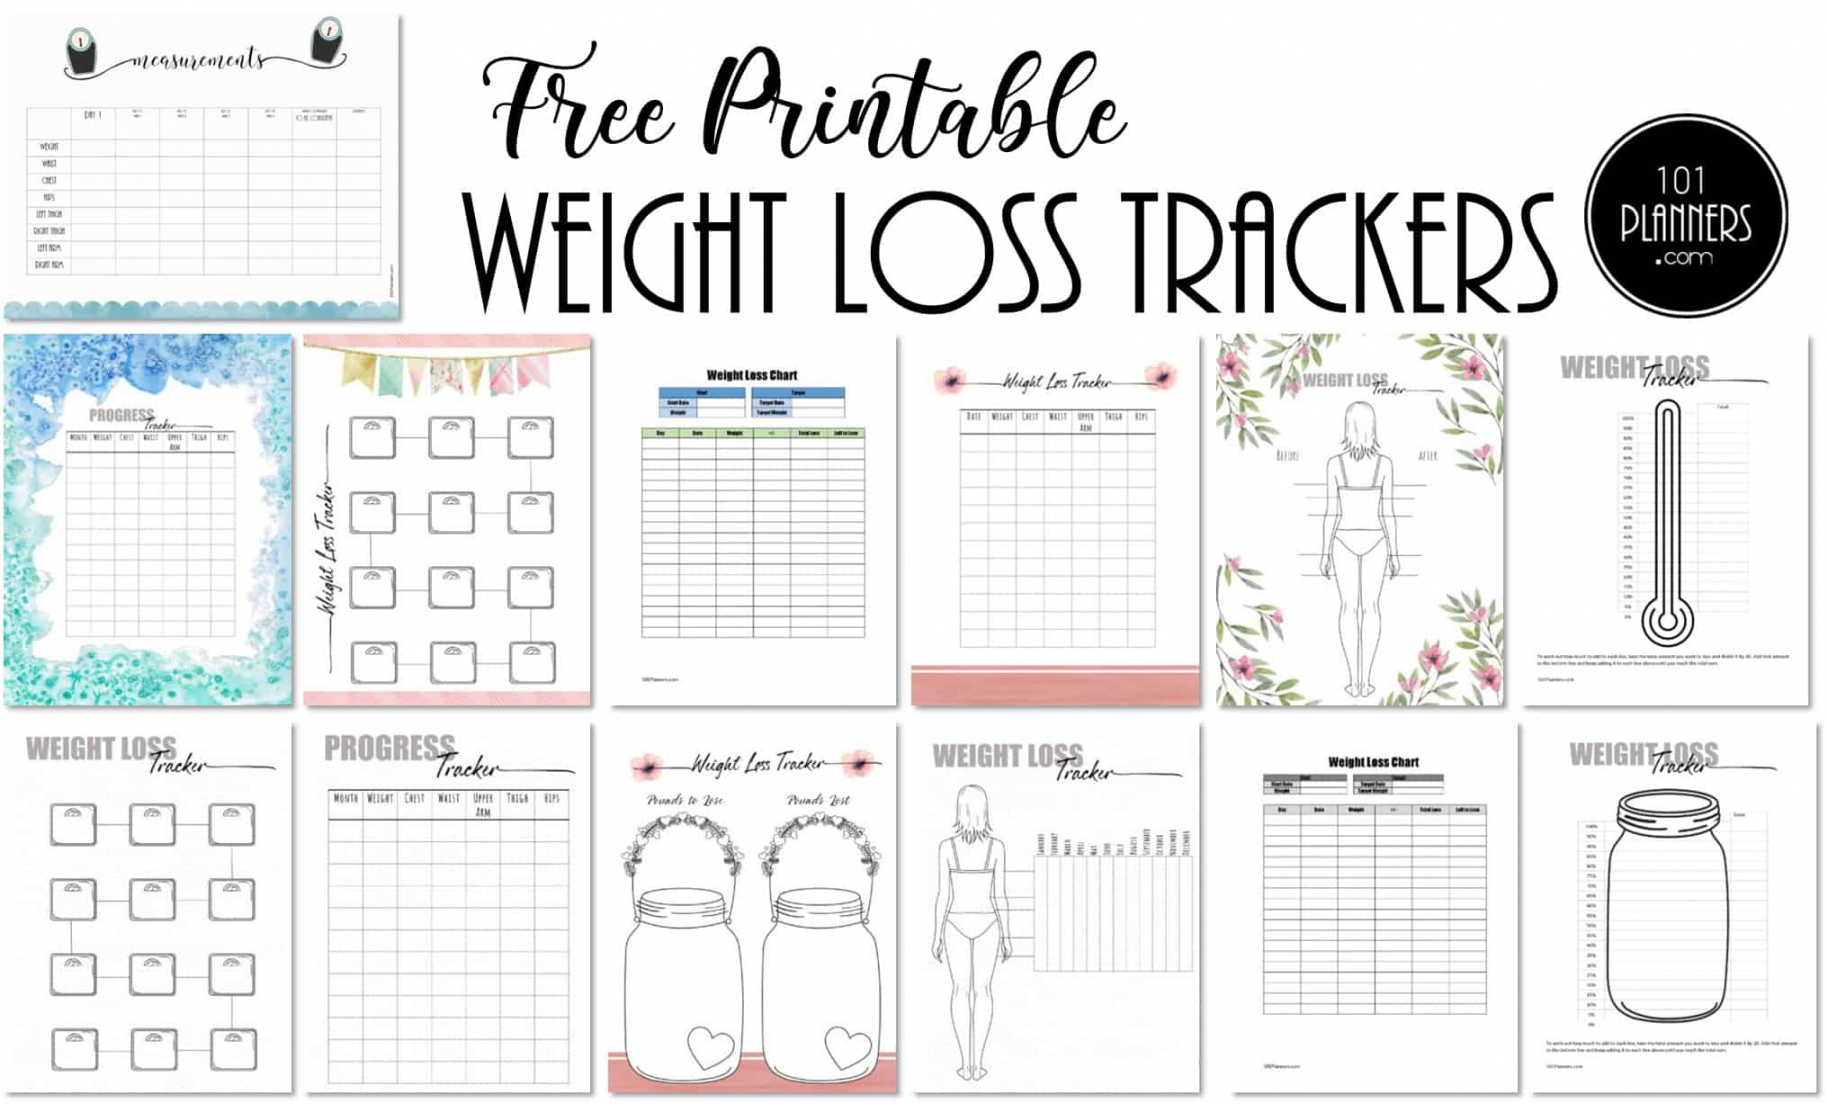 FREE Weight Loss Tracker Printable  Customize before you Print - FREE Printables - Free Weight Loss Tracker Printable